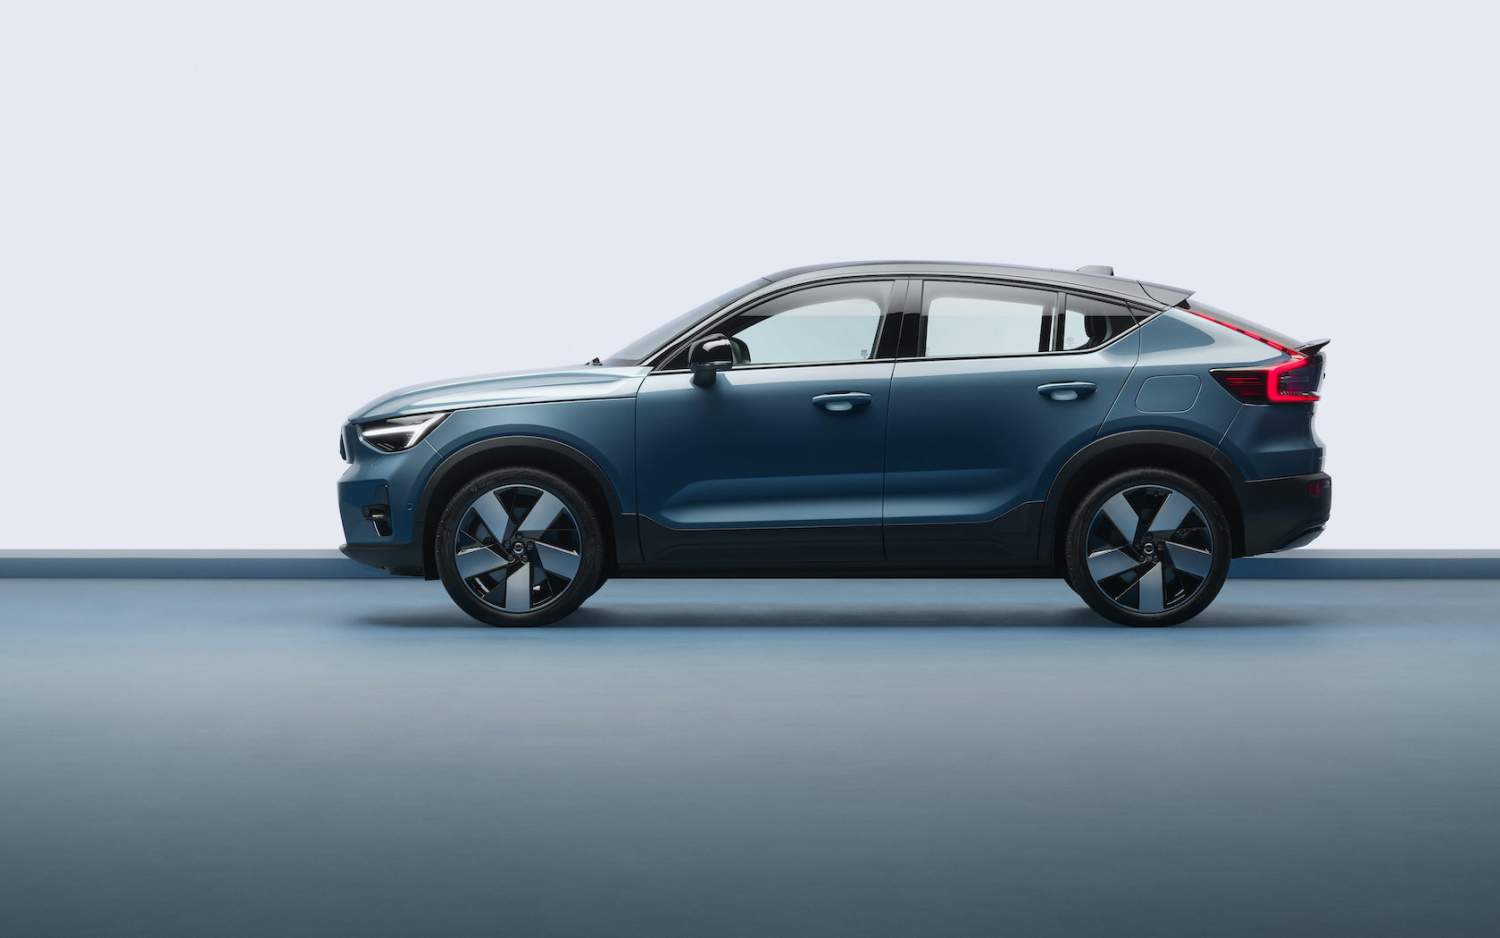 2022 Volvo C40 Recharge electric crossover coupe aims to upend car